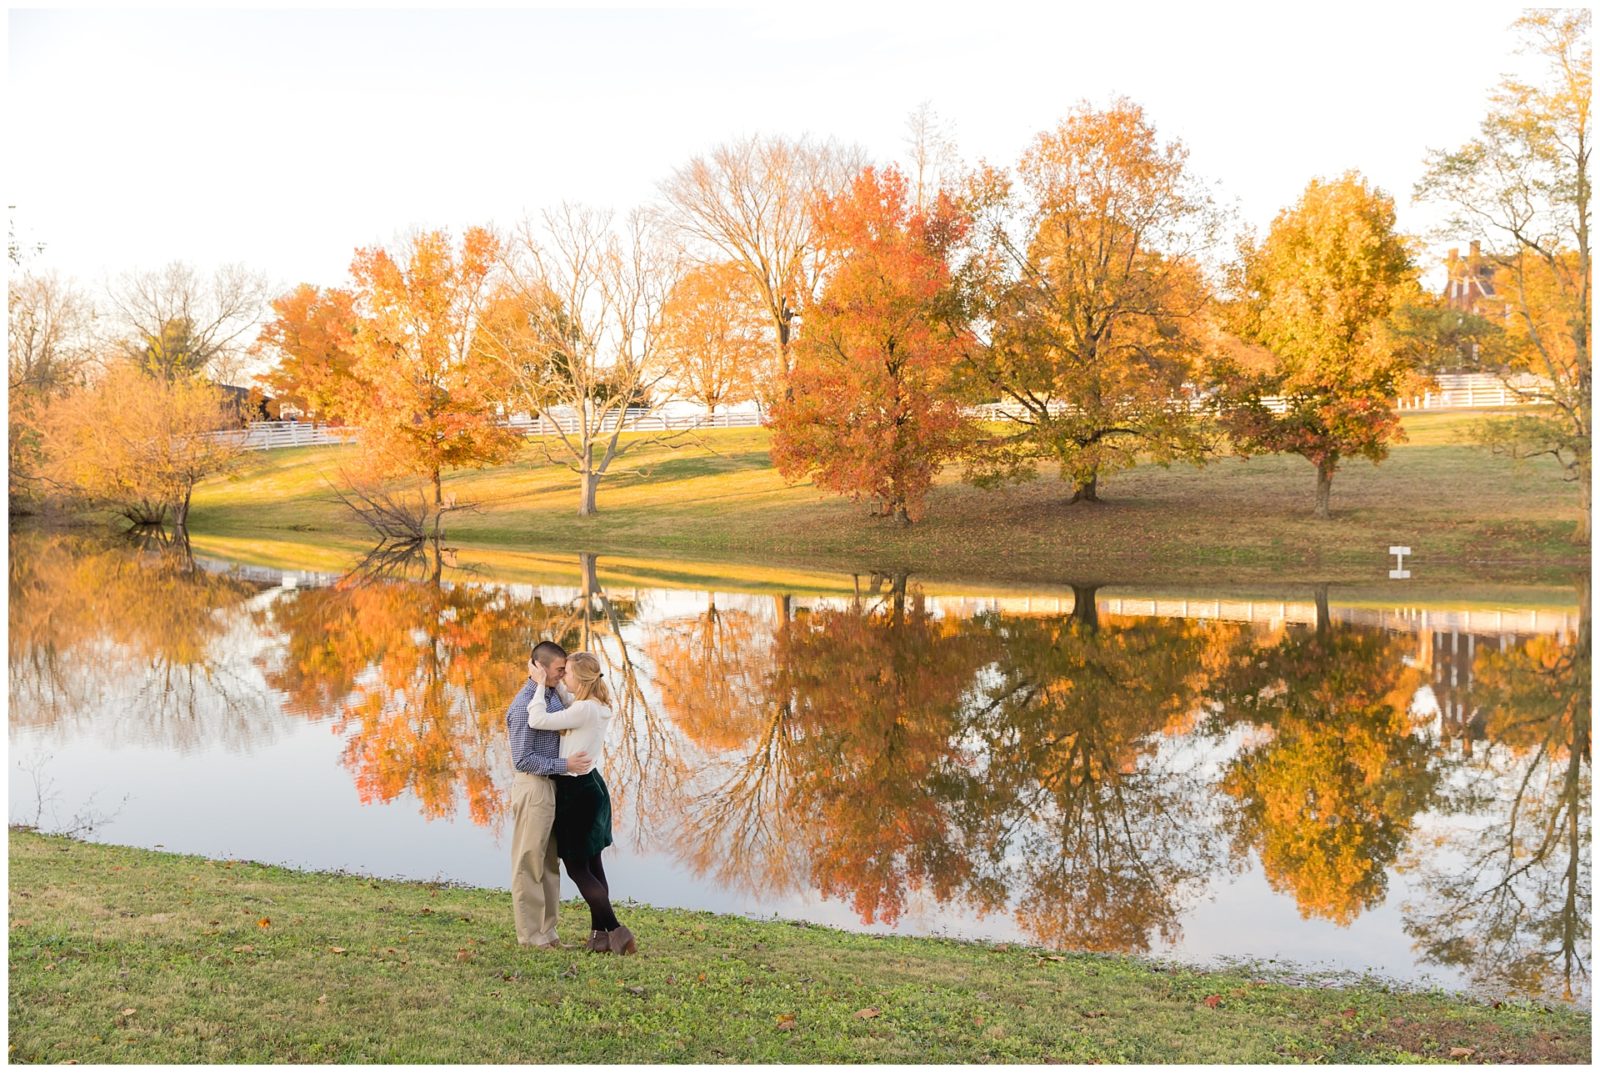 Countryside Fall Engagement Session at a pond at Shaker Village in Harrodsburg, KY